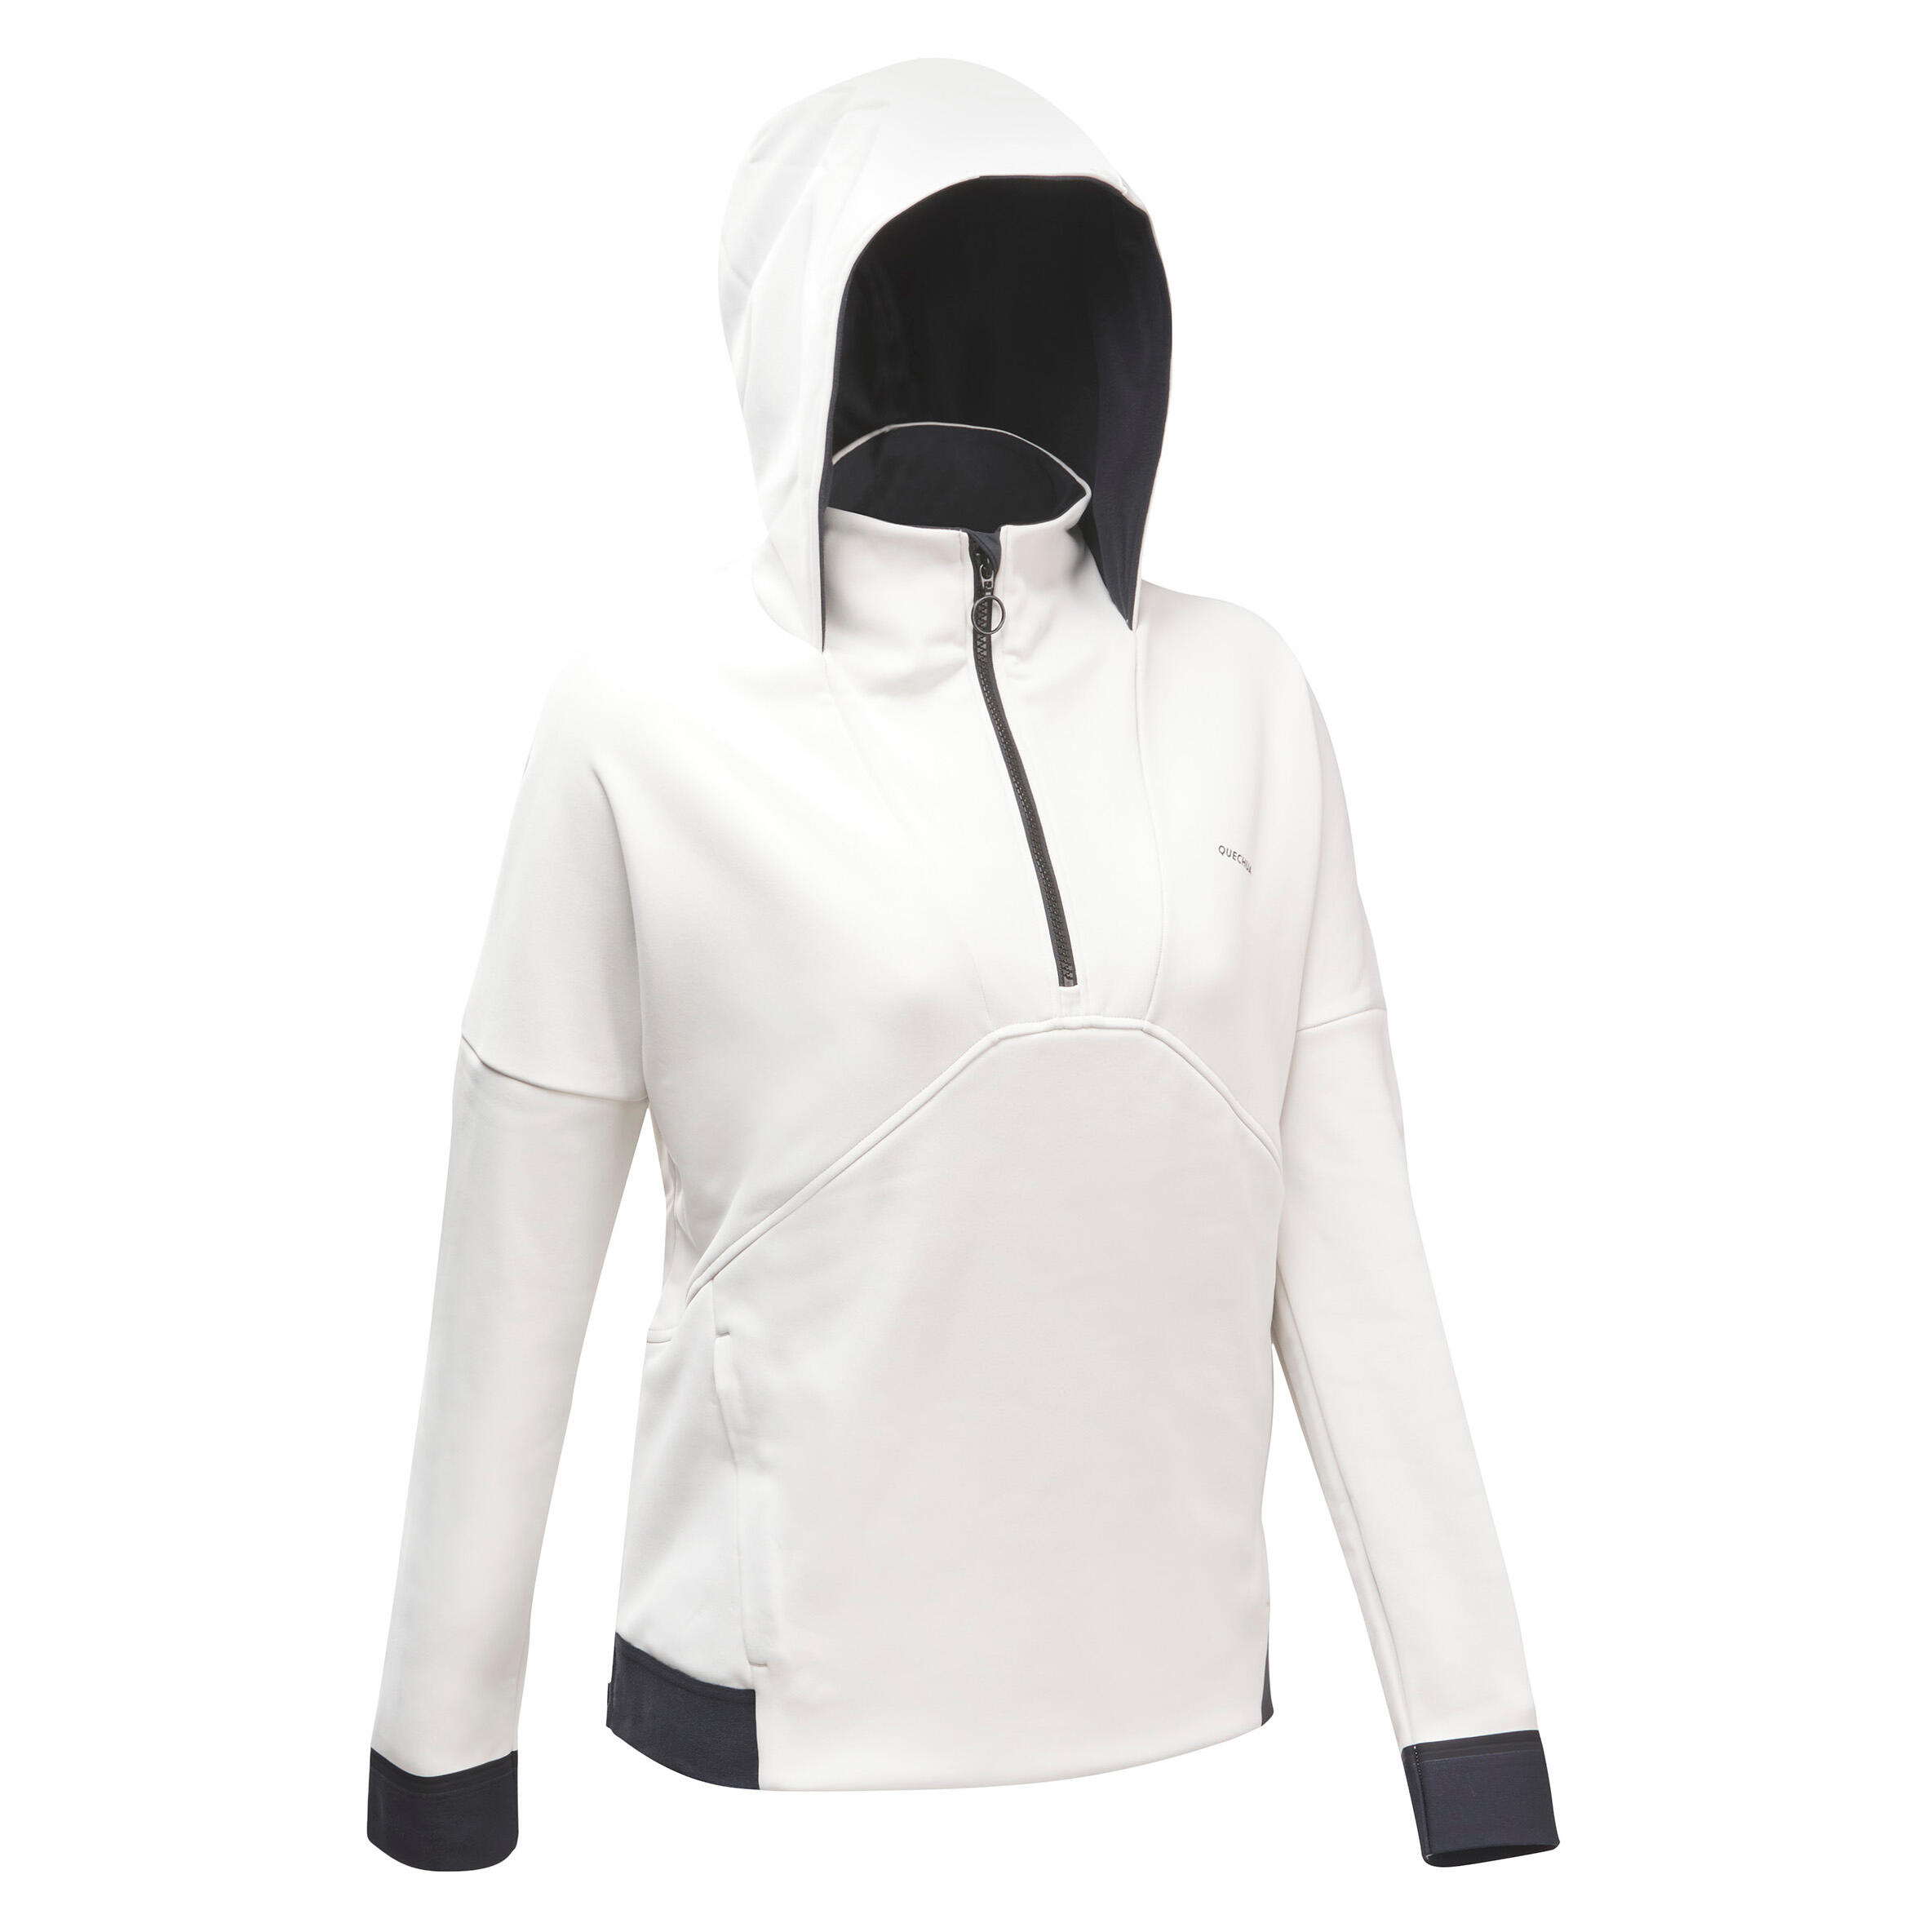 Women Thermal for Skiing - BL100 Black